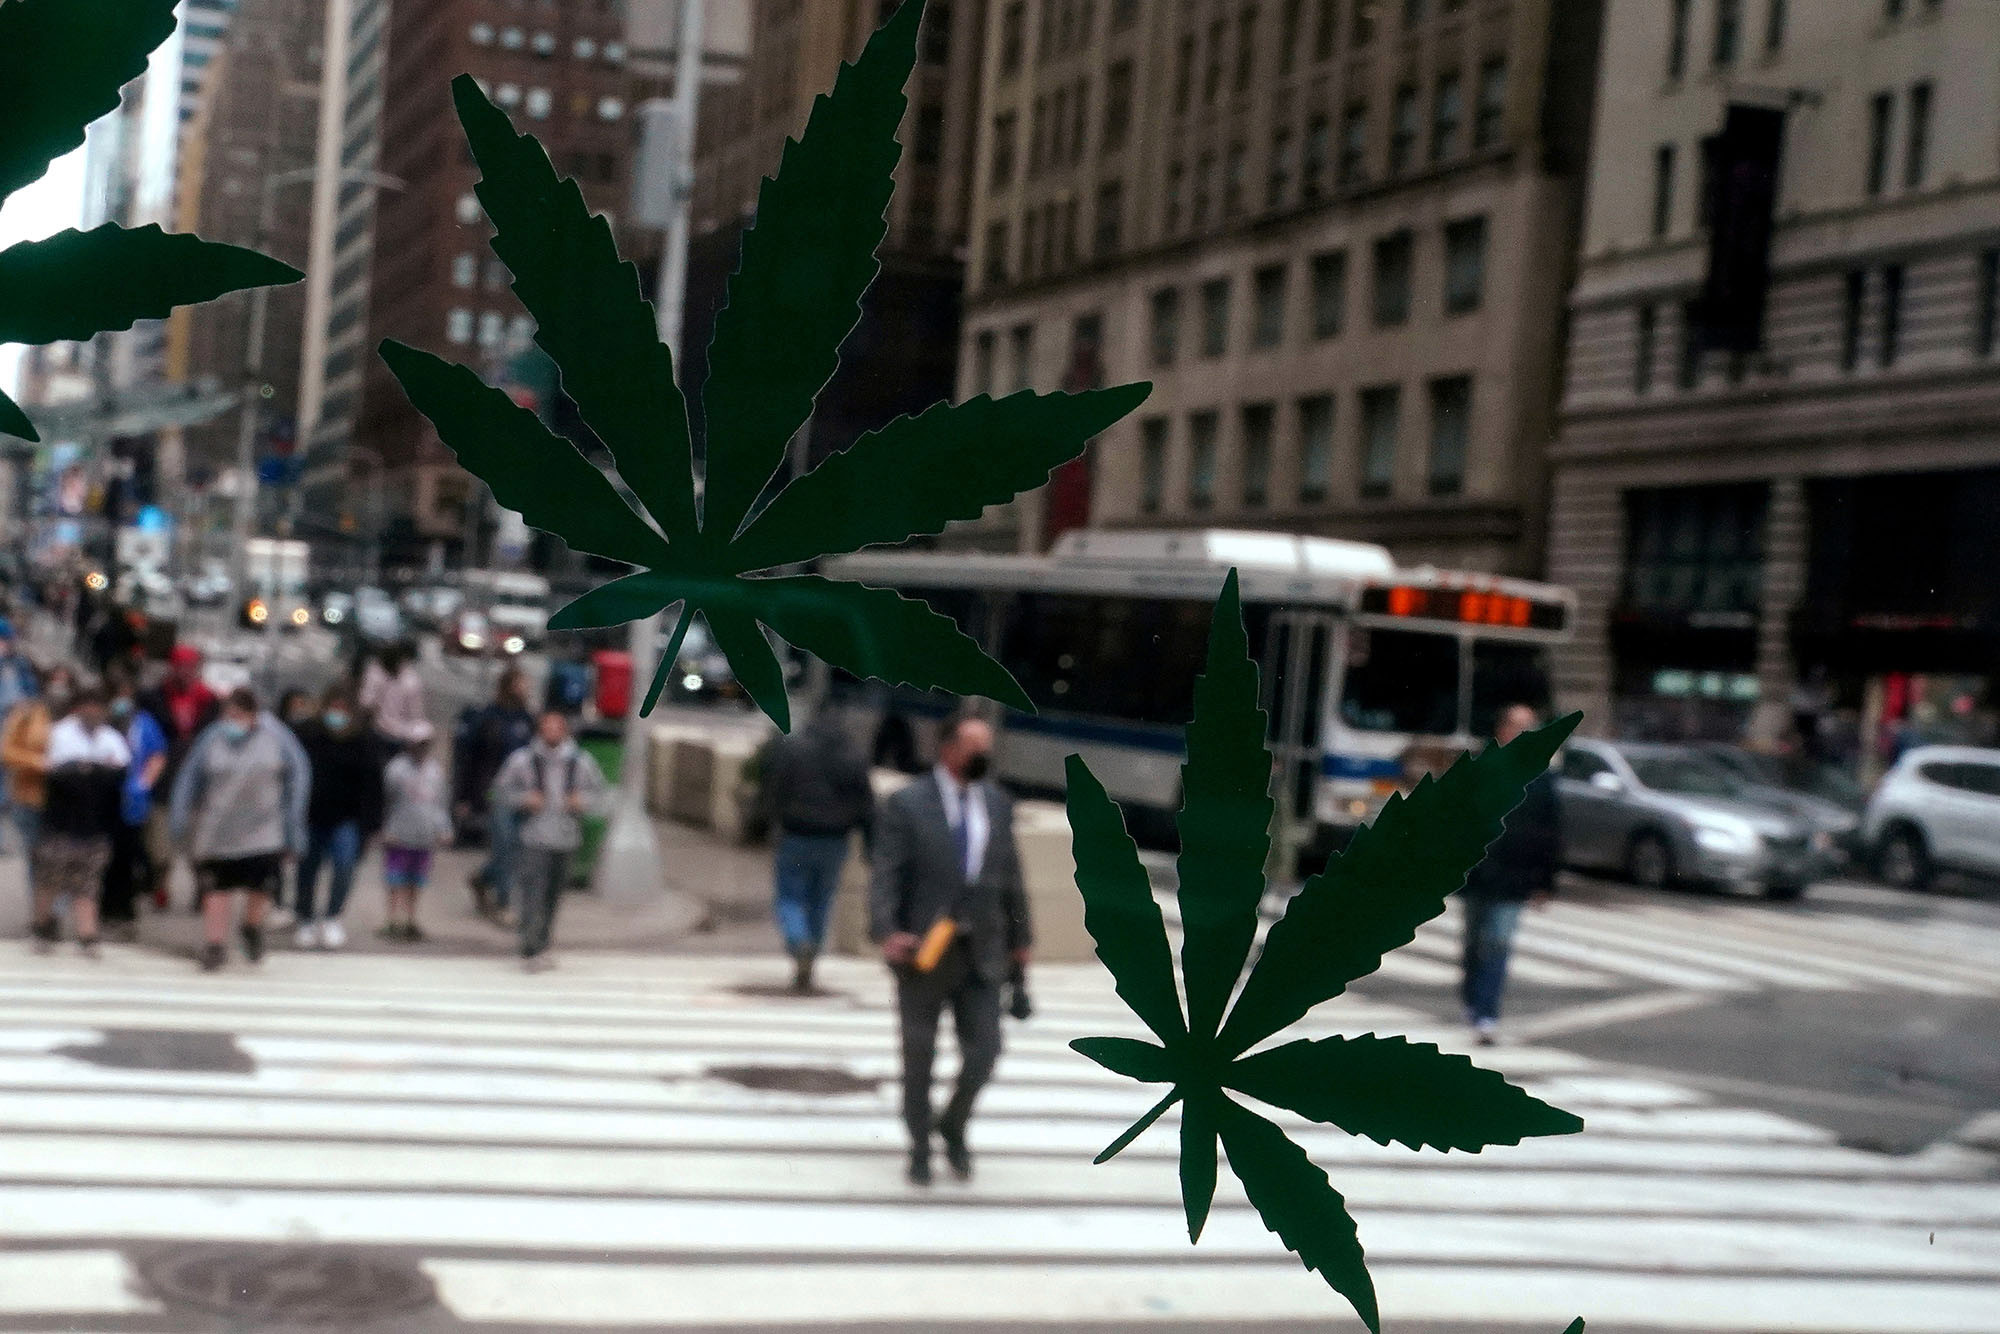 Cannabis stickers on a Weed World store window are pictured the day New York State legalized recreational marijuana use amid the coronavirus disease (COVID-19) pandemic in the Manhattan borough of New York City, New York, U.S., March 31, 2021.